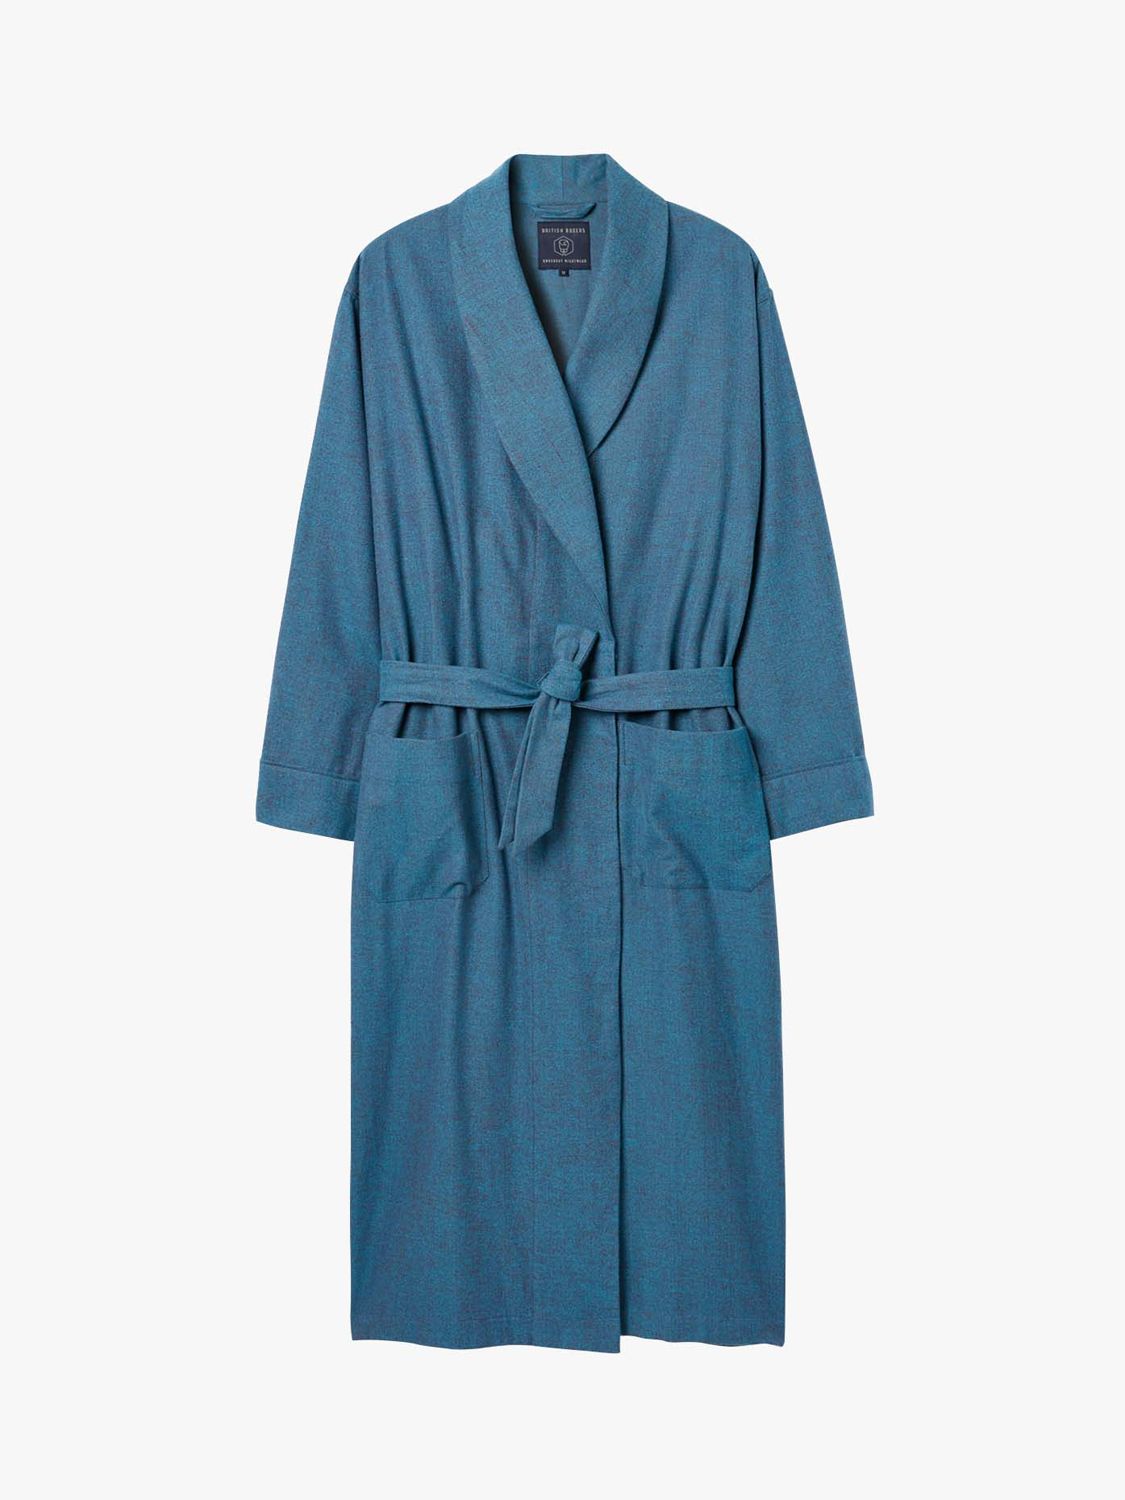 British Boxers Herringbone Brushed Cotton Dressing Gown, Teal, S